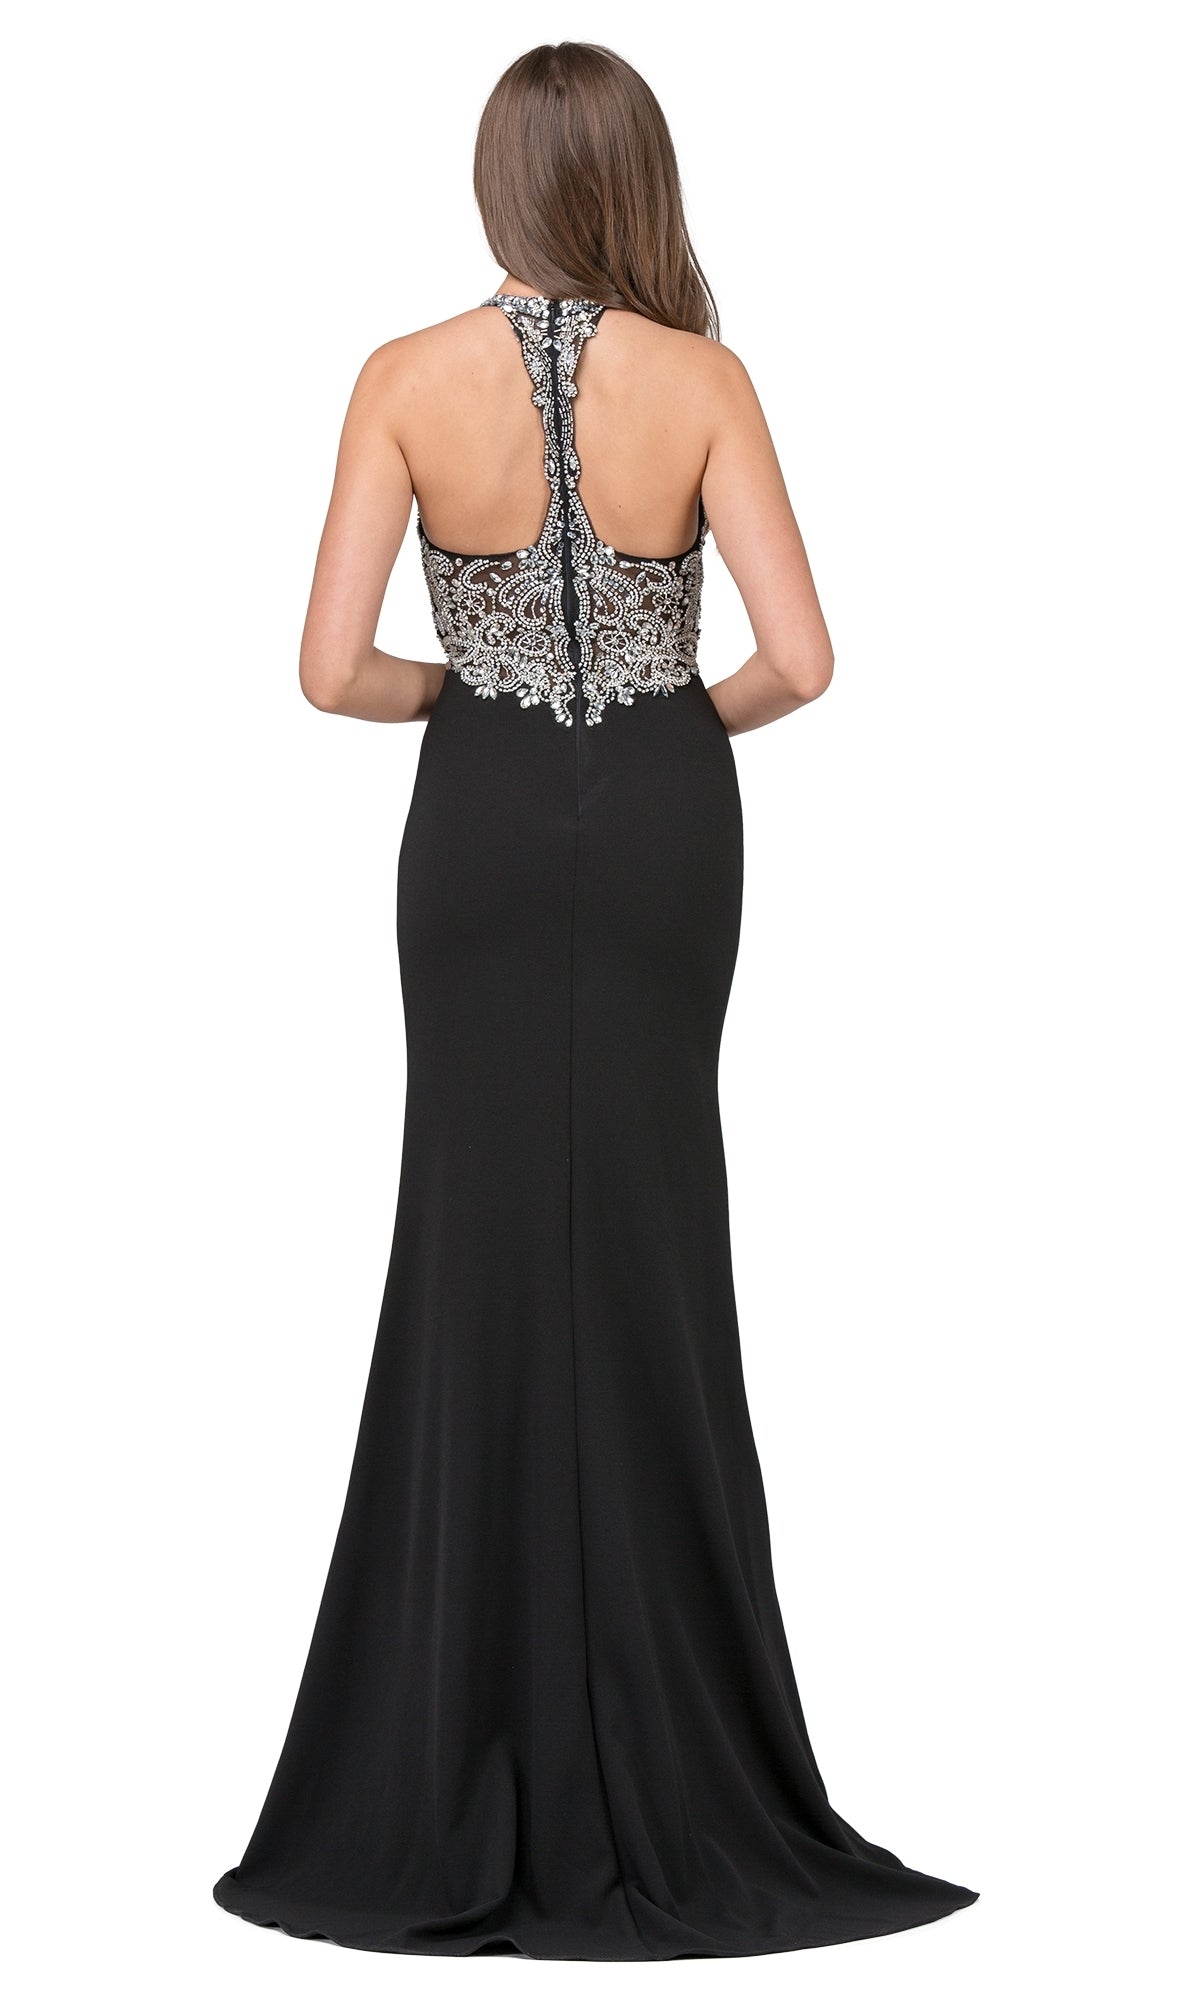 Beaded-Bodice Long Prom Dress with T-Back